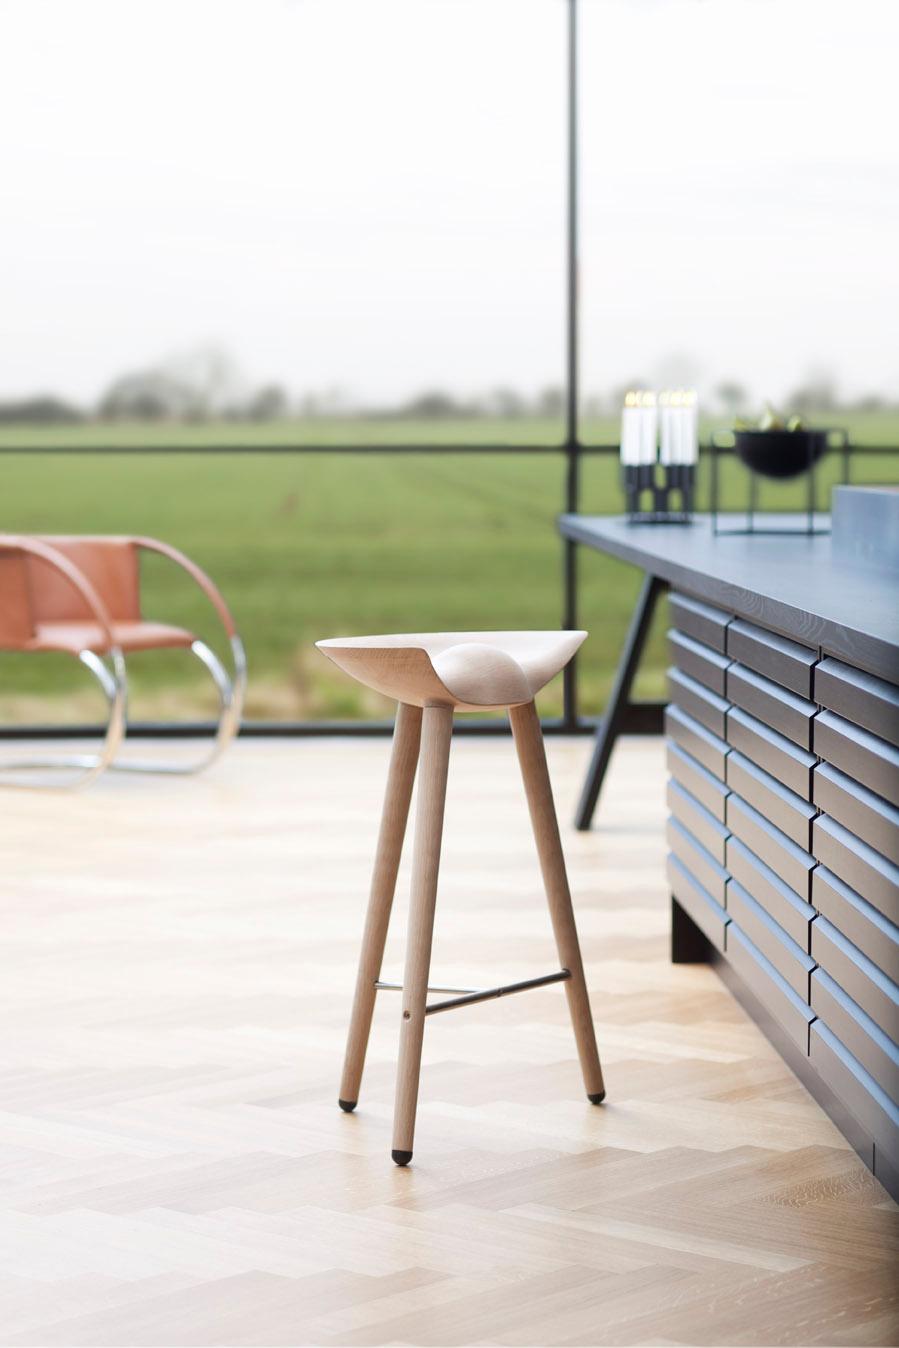 ML 42 Oak and stainless steel counter stool by Lassen
Dimensions: H 69 x W 36 x L 55.5 cm
Materials: Oak, Stainless Steel

In 1942 Mogens Lassen designed the stool ML42 as a piece for a furniture exhibition held at the Danish Museum of Decorative